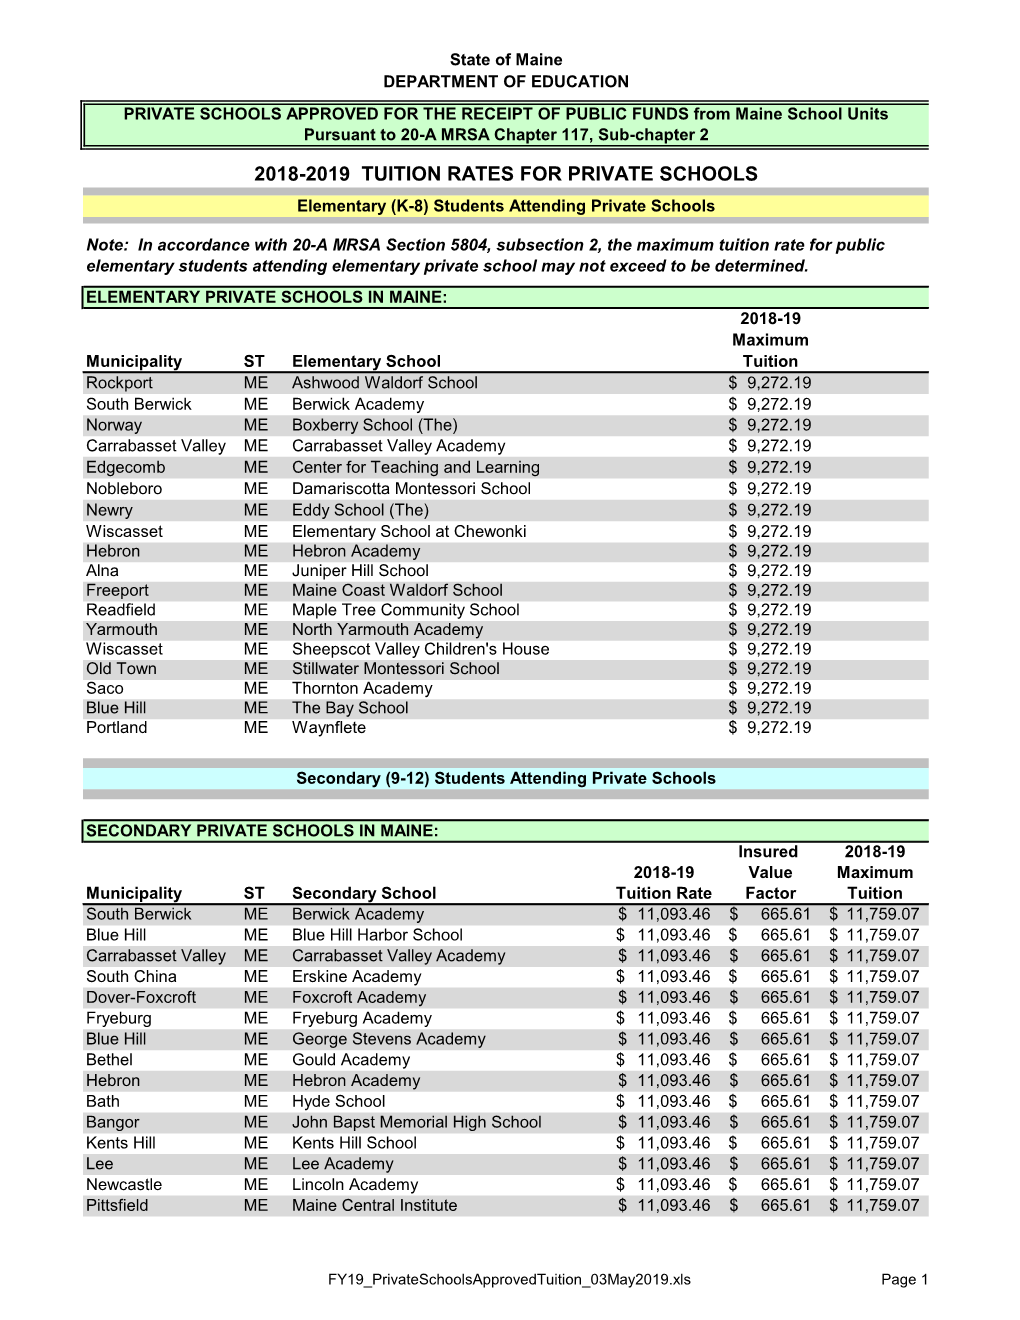 2018-2019 TUITION RATES for PRIVATE SCHOOLS Elementary (K-8) Students Attending Private Schools